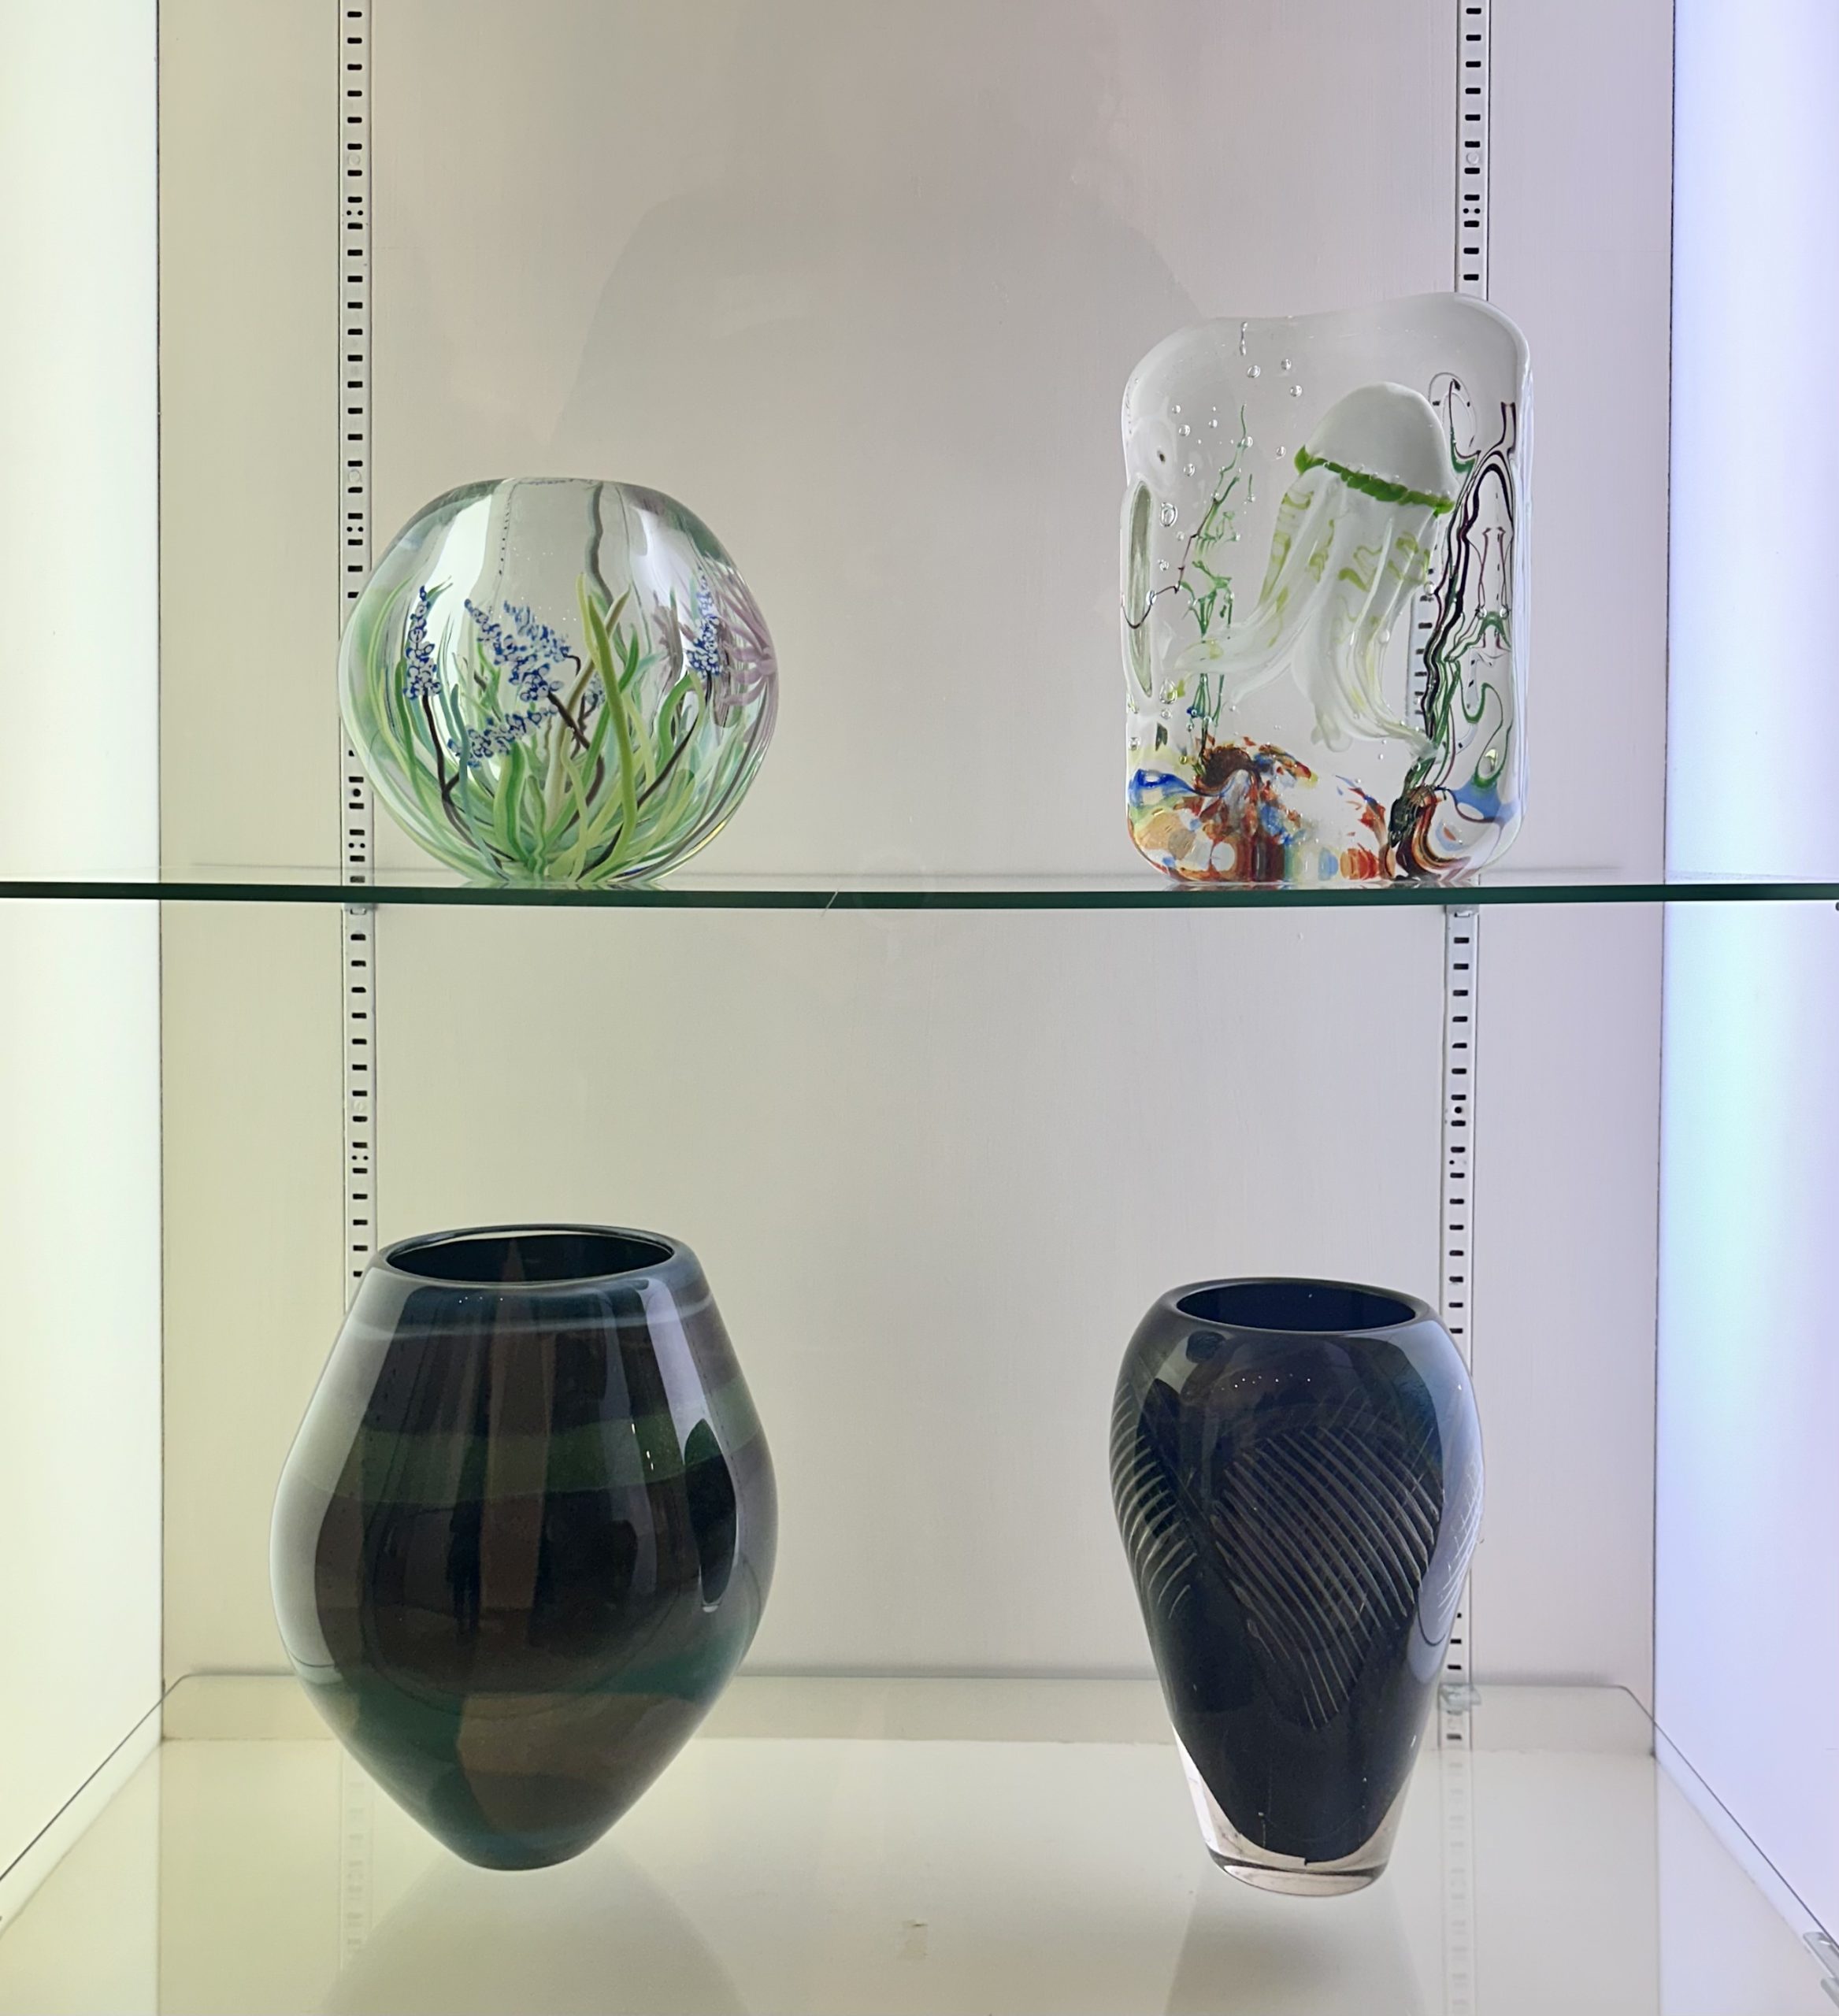 Four glass artworks in a case at the Bergstrom-Mahler